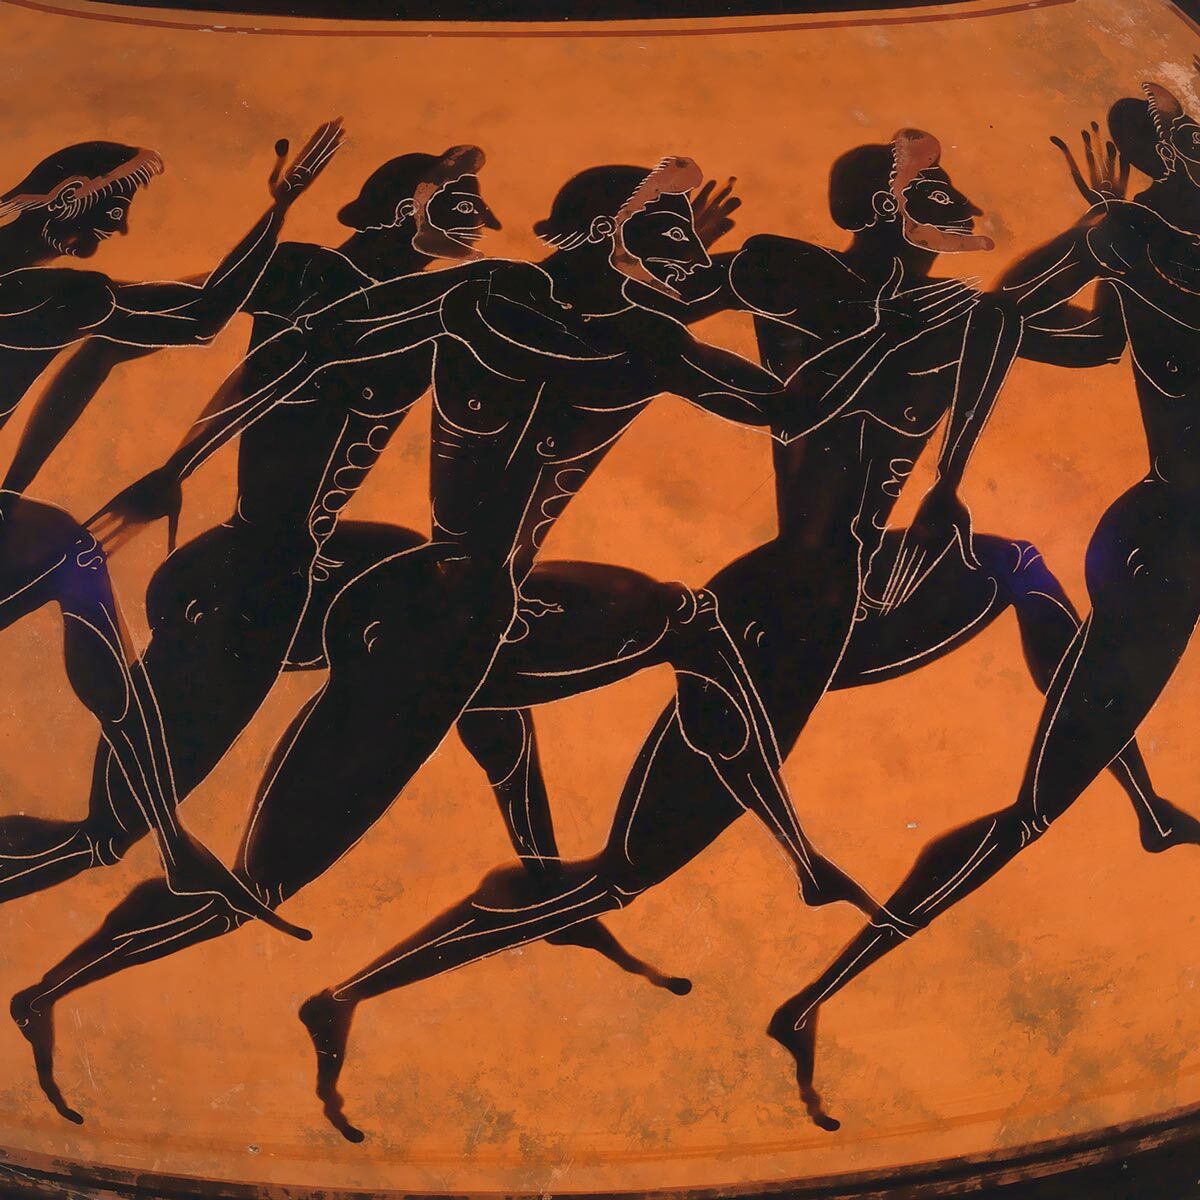 This vase depicts a group of men racing in a crowd